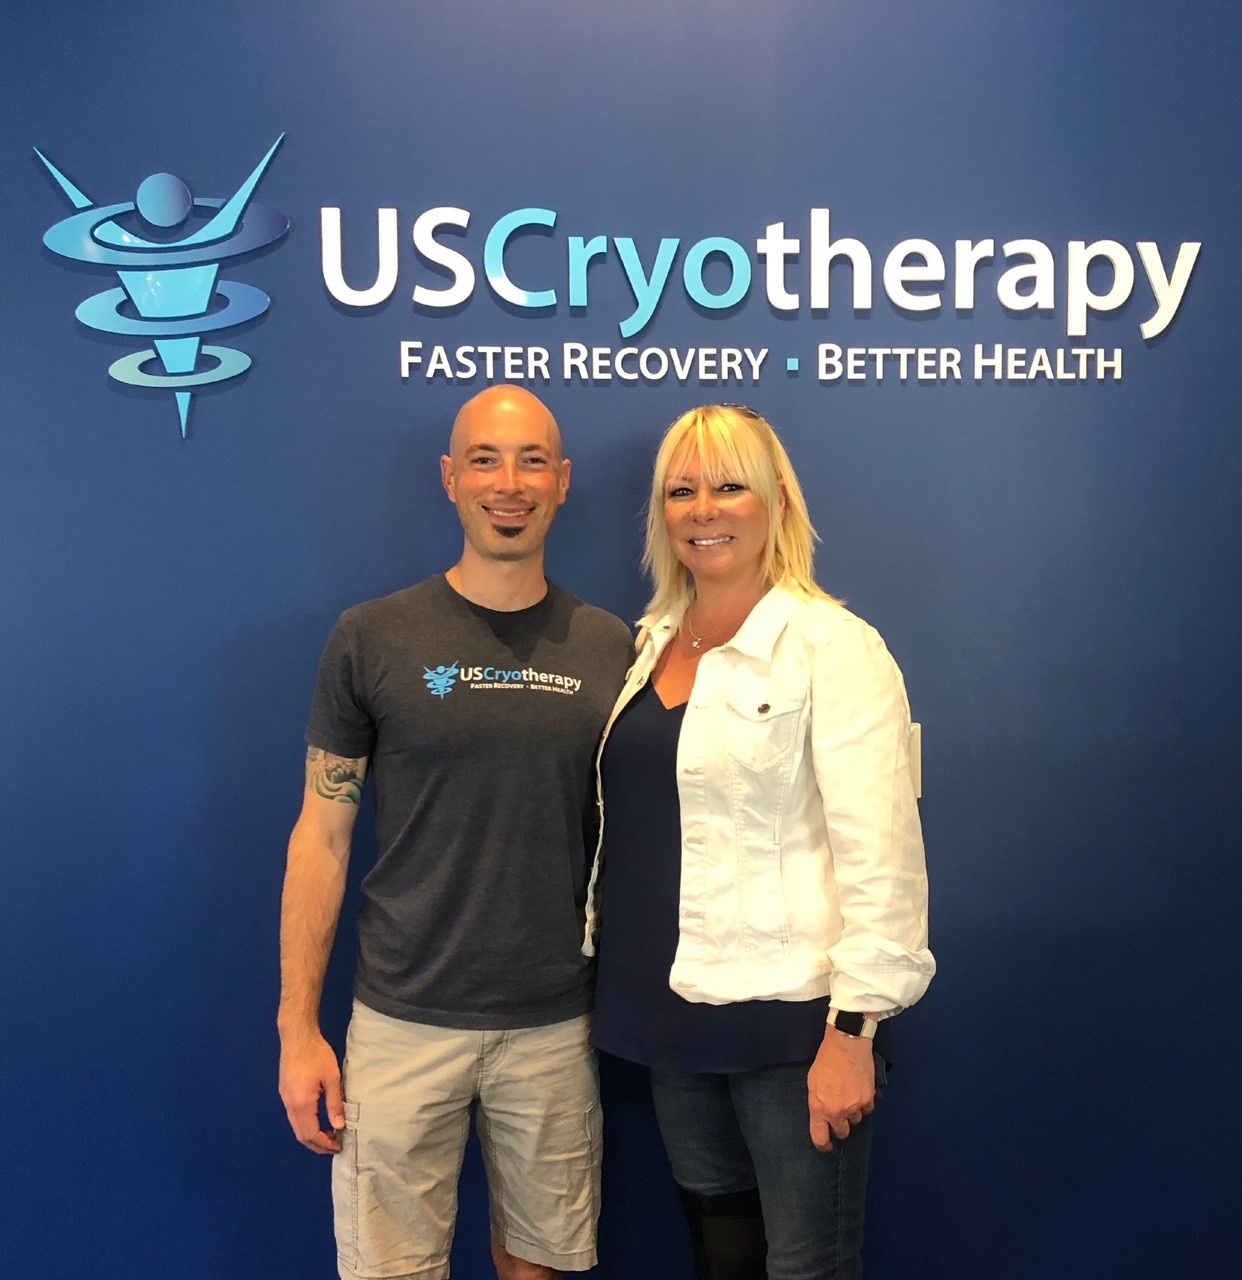 US Cryotherapy - June 19, 2018